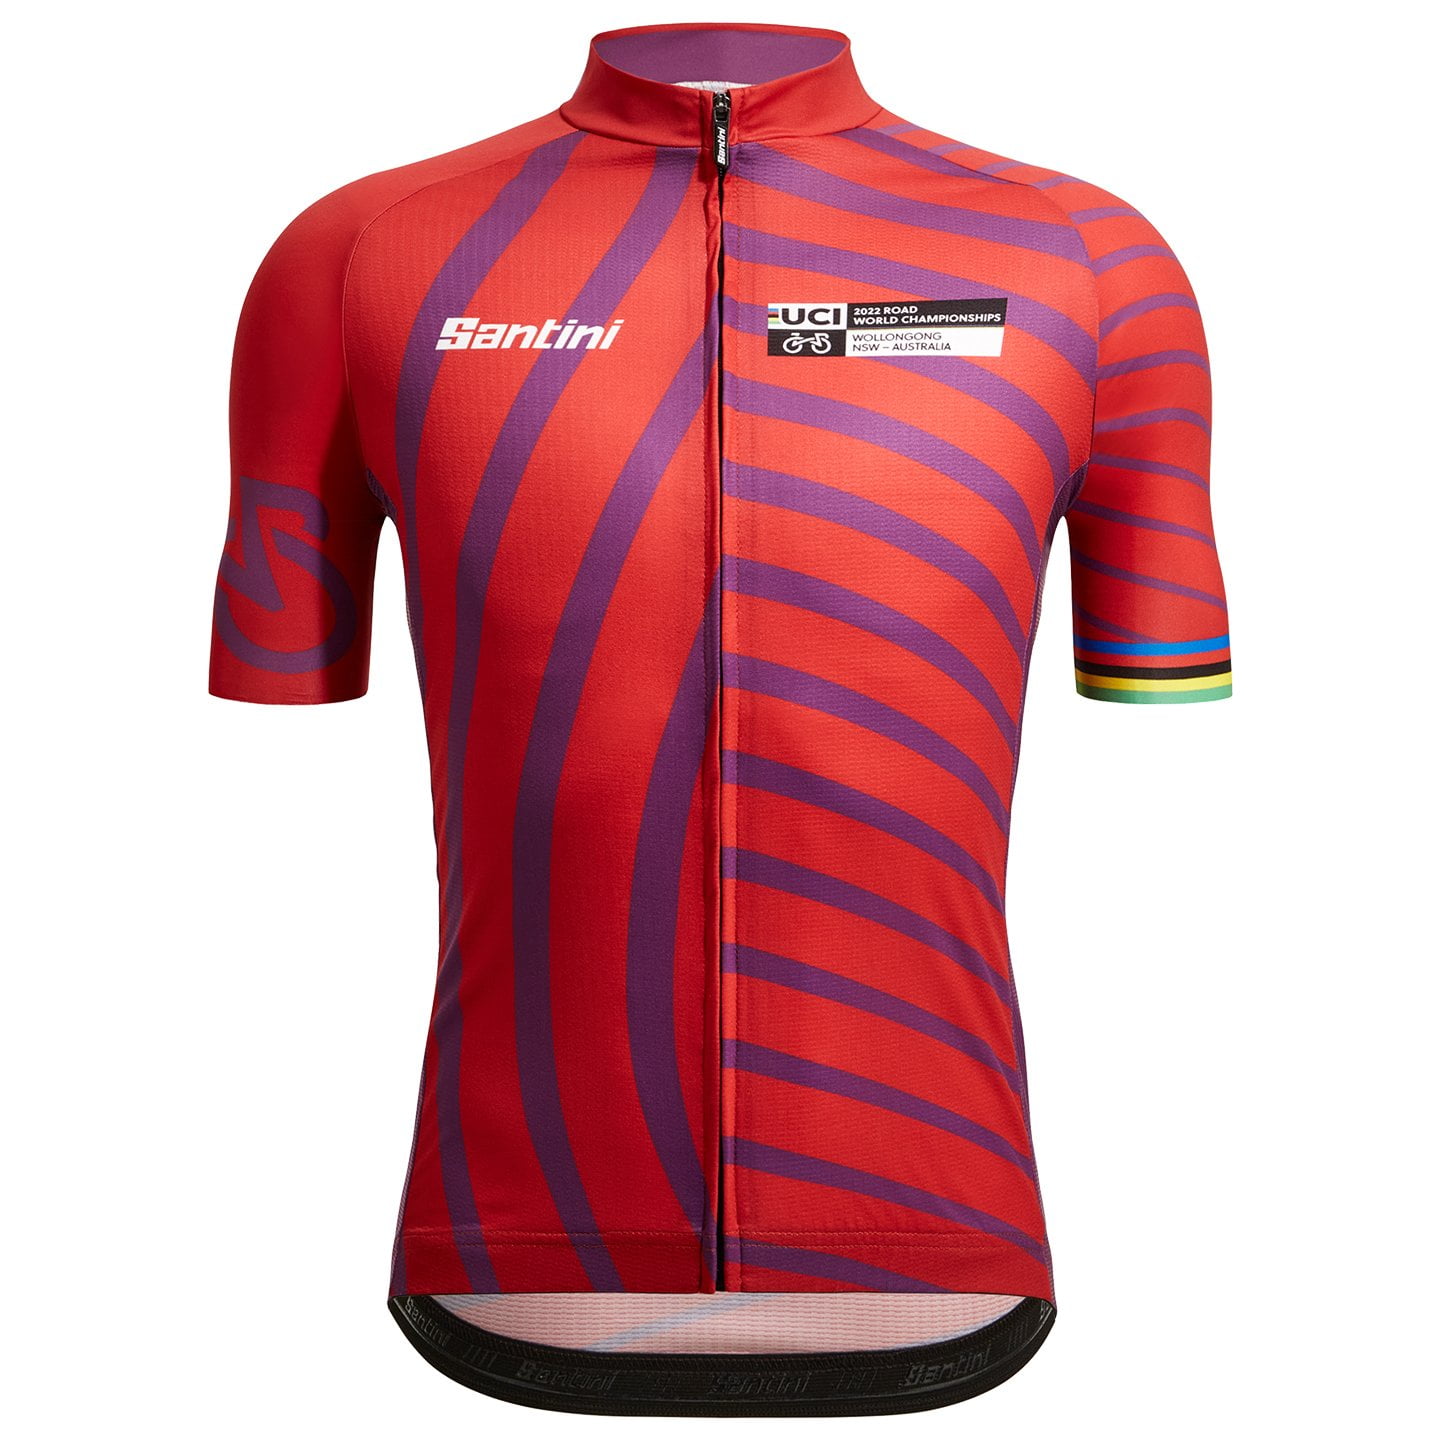 UCI WORLD CHAMPIONSHIP WOLLONGONG 2022 Short Sleeve Jersey, for men, size M, Cycle jersey, Cycling clothing